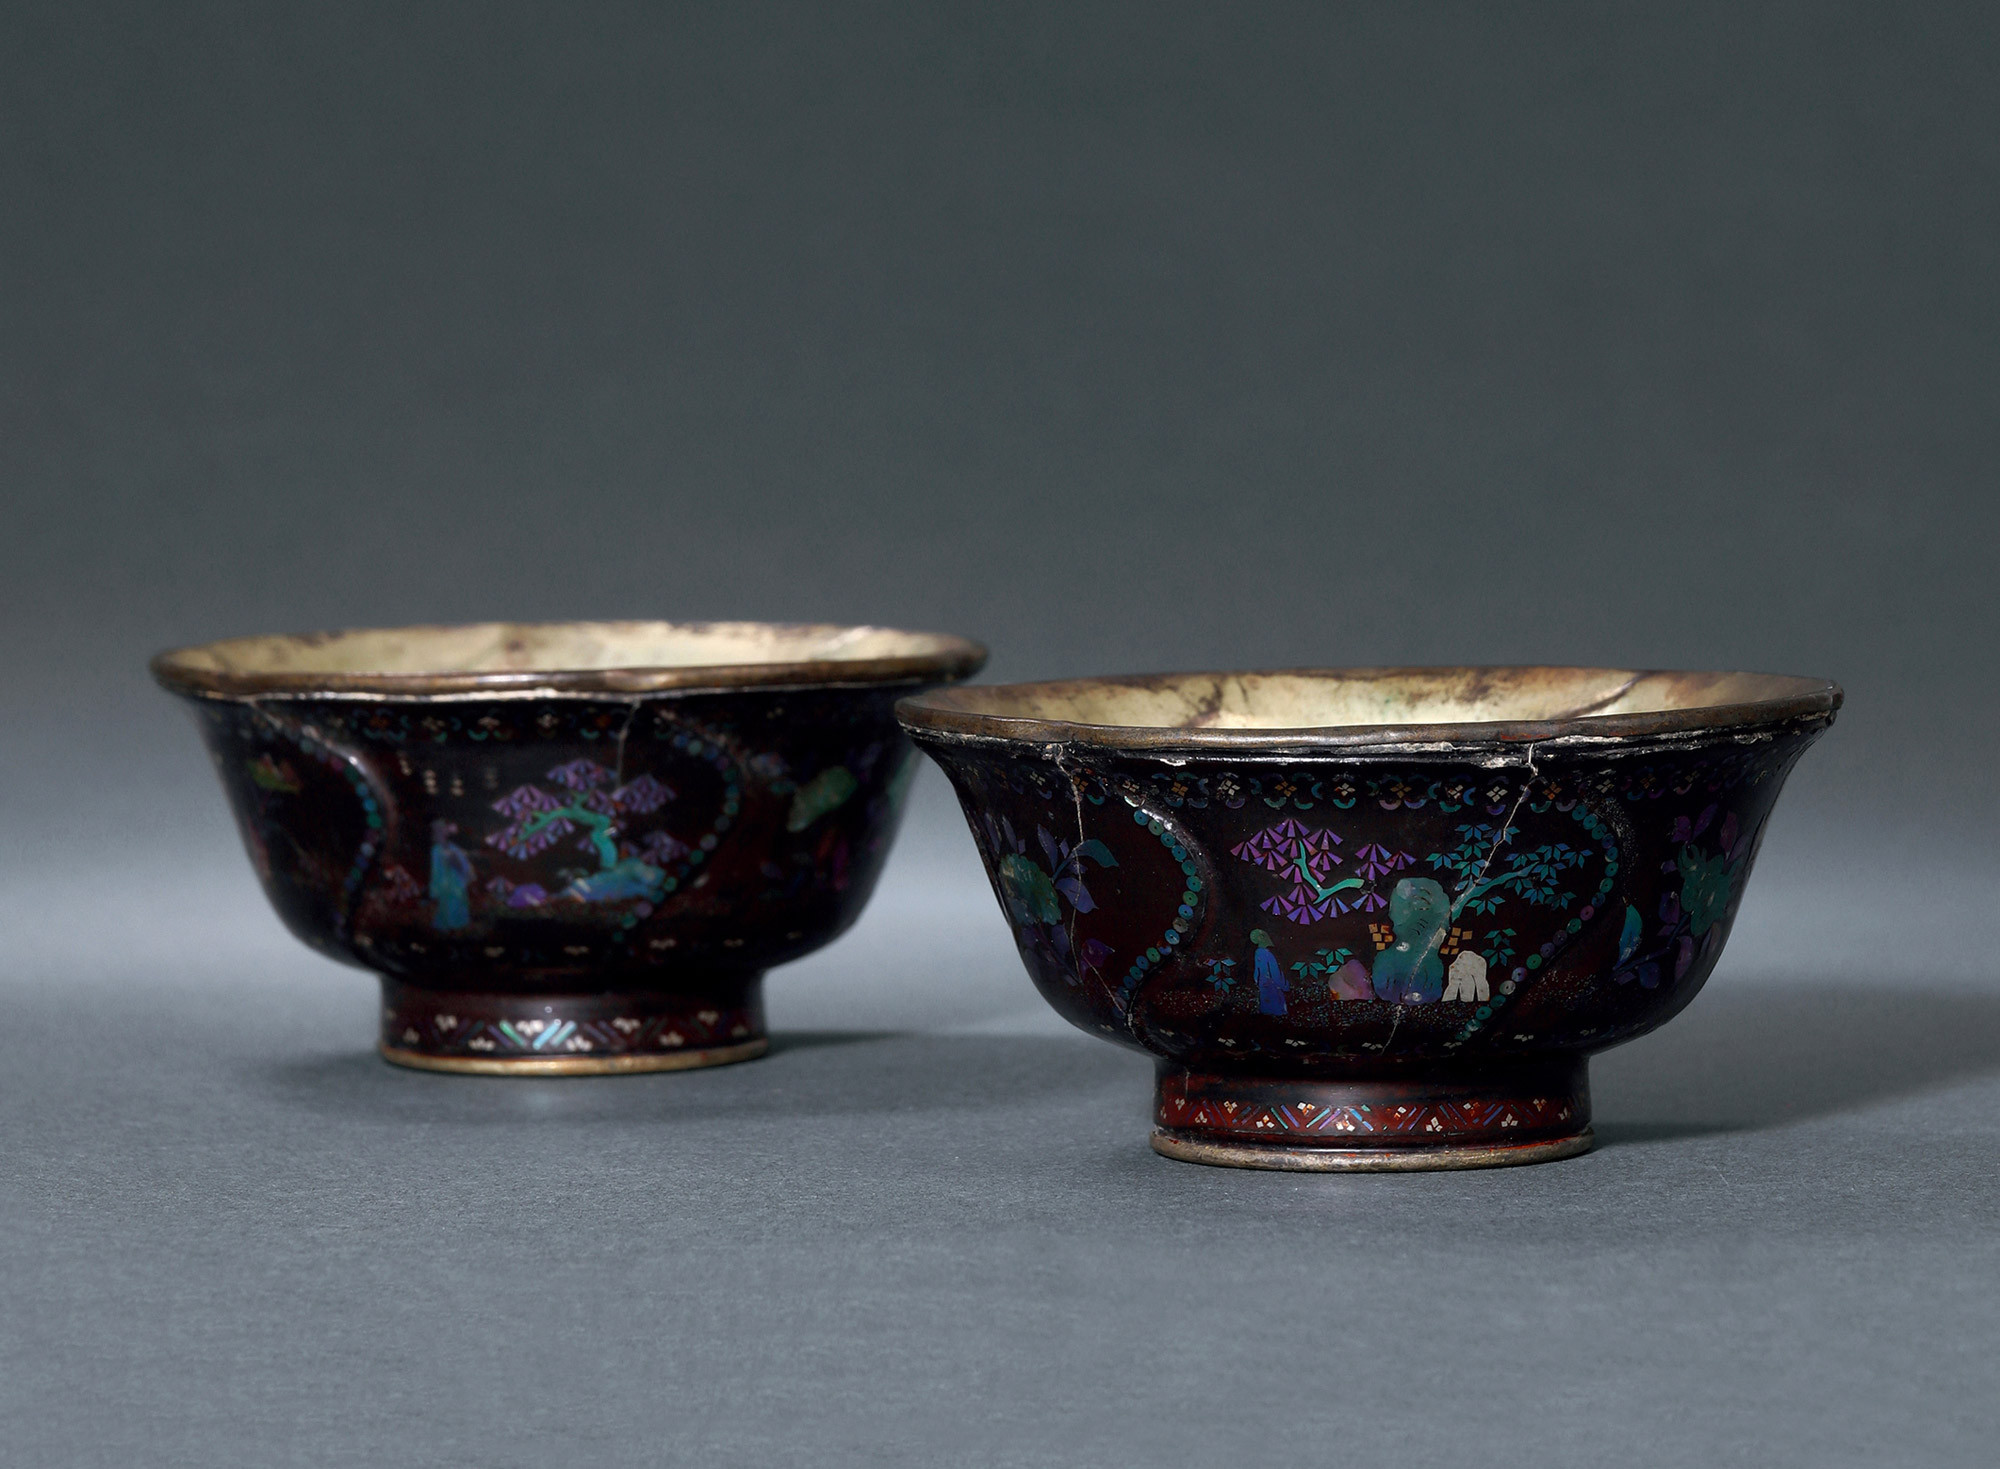 A PAIR OF BLACK LACQUER WITH MOTHER-OF-PEARL INLAID‘LANDSCAPE AND FIGURE’BOWLS